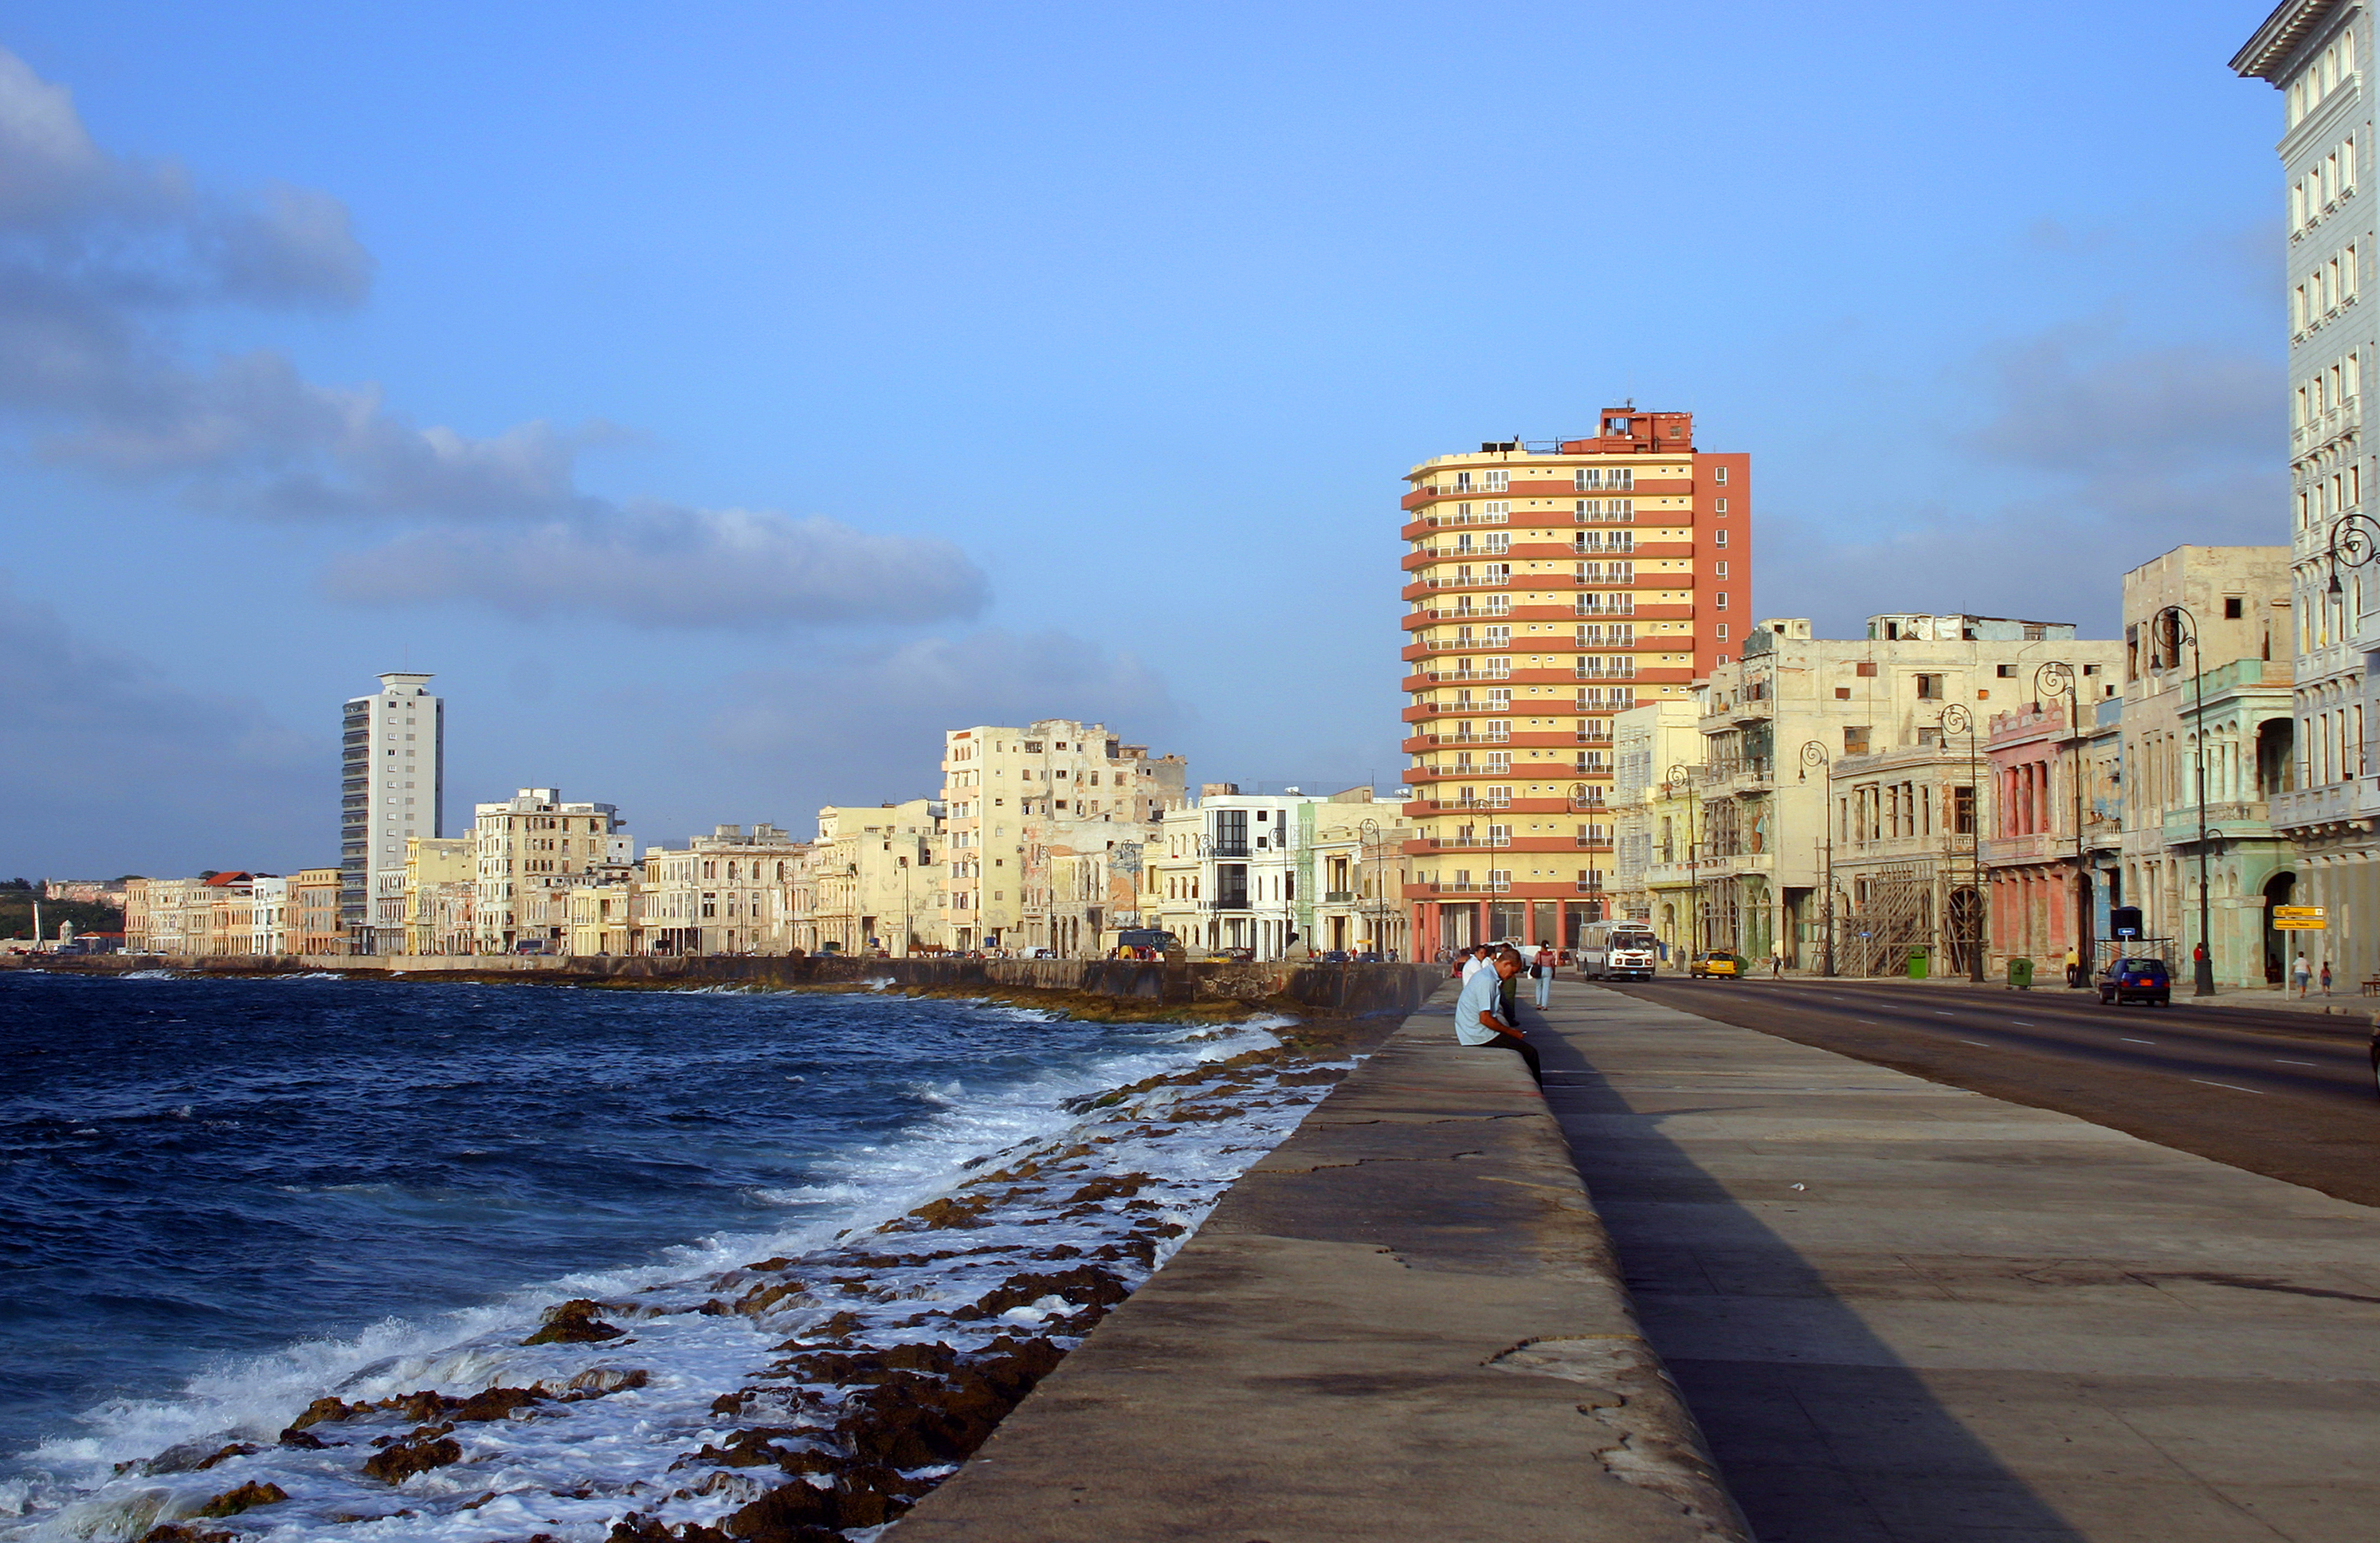 The Malecón, Havana, Cuba. Image by Flickr user Patxi64 (CC BY-NC-ND 3.0).